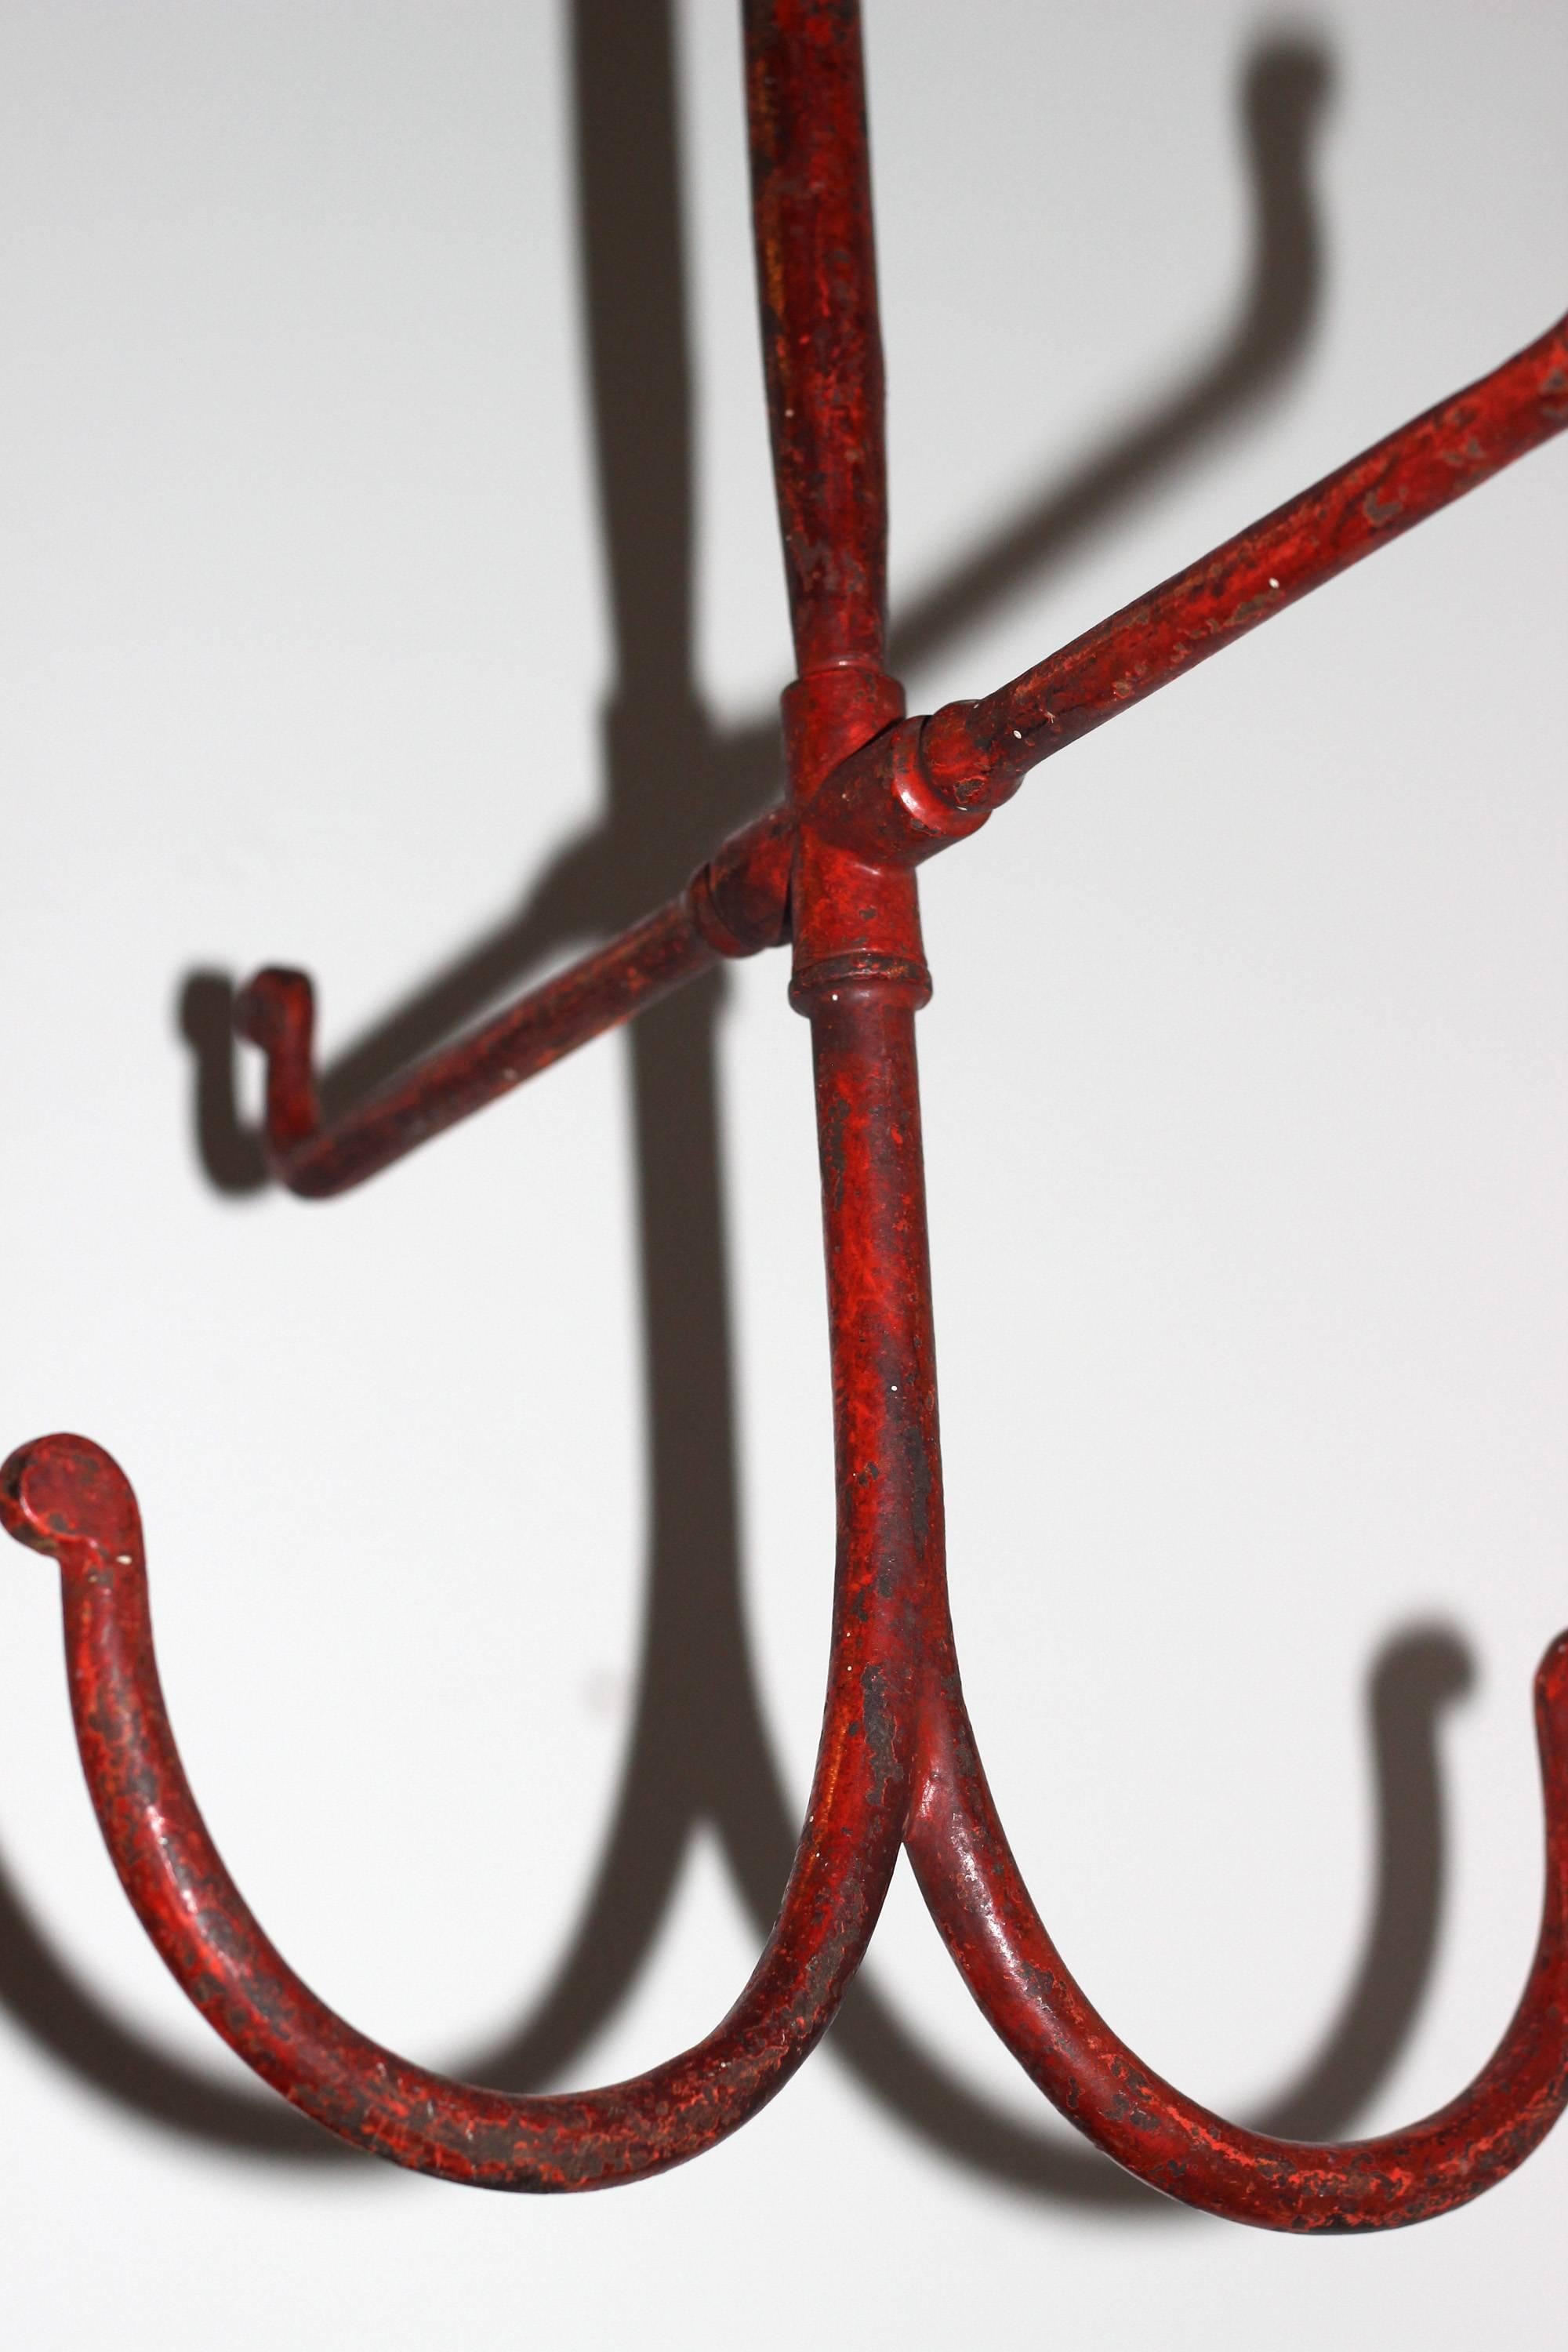 Folk Art Large Painted Iron Hooks/Harness Holder, Old Red Paint, American, circa 1900 For Sale